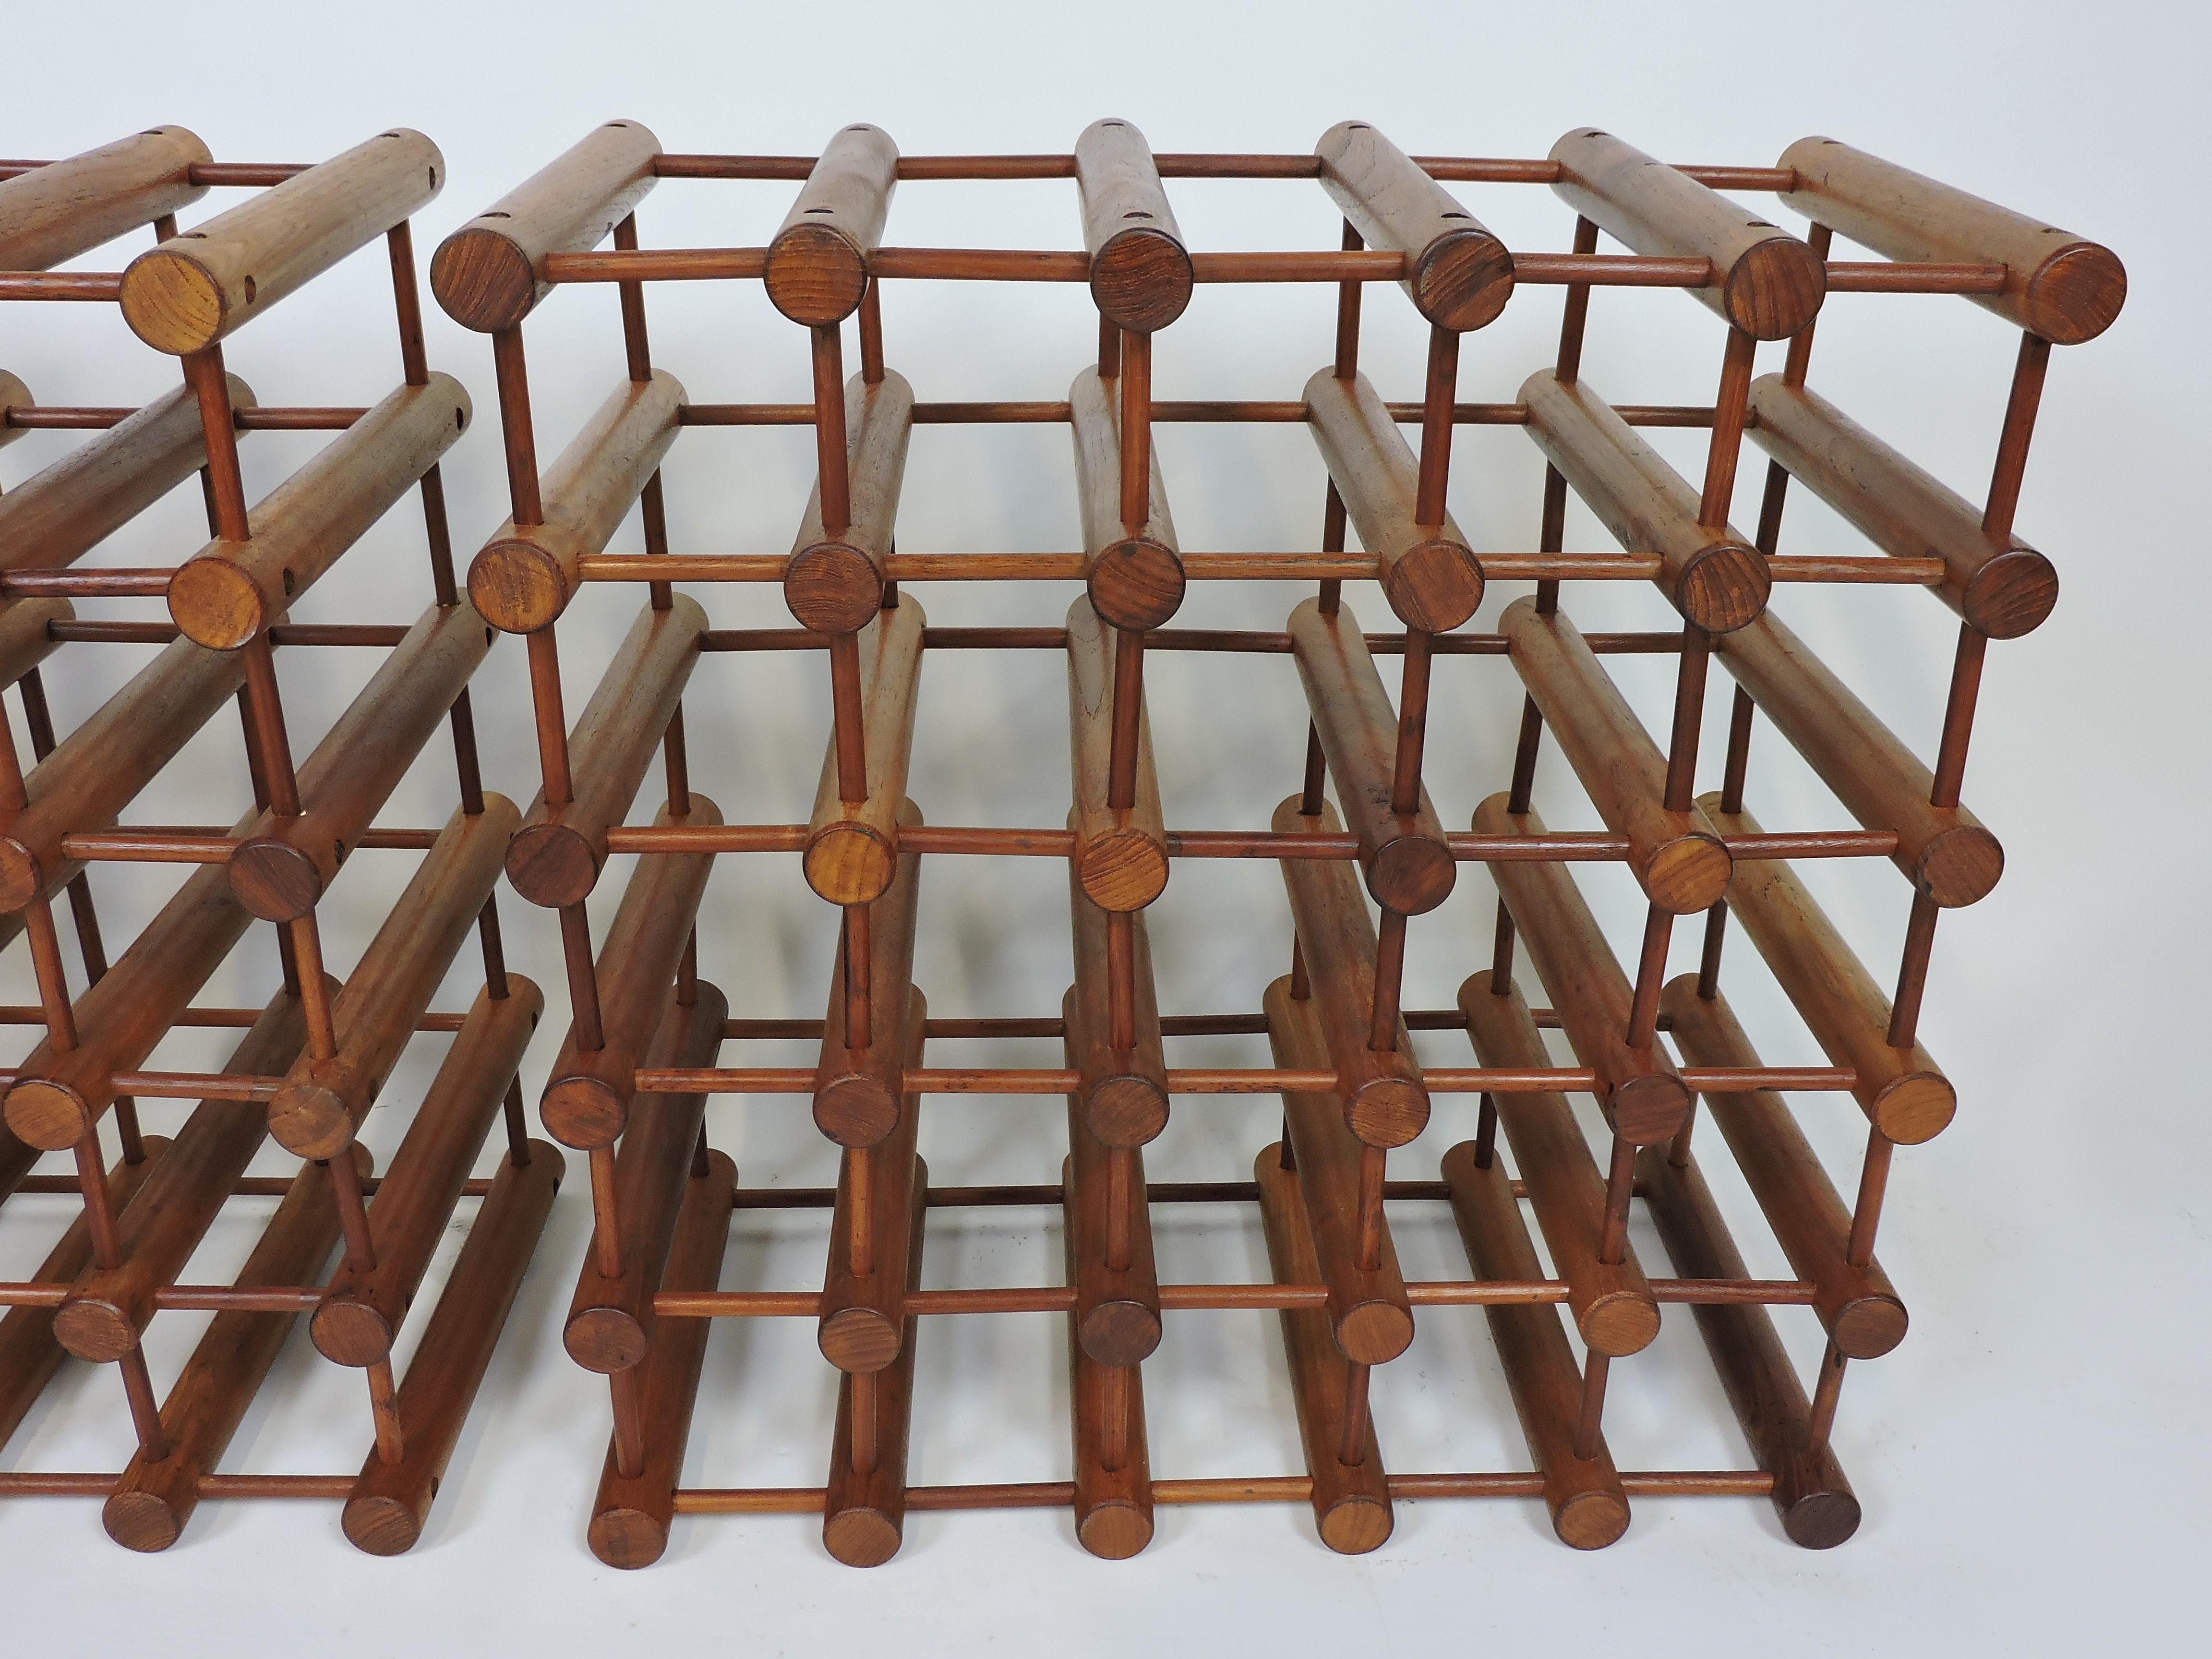 Beautiful Danish teak modular wine rack designed by Richard Nissen and made in Denmark by Langaa. This rack has an ingenious design consisting of solid teak pegs and dowels which can be taken apart and reconfigured in any way that you want. This is